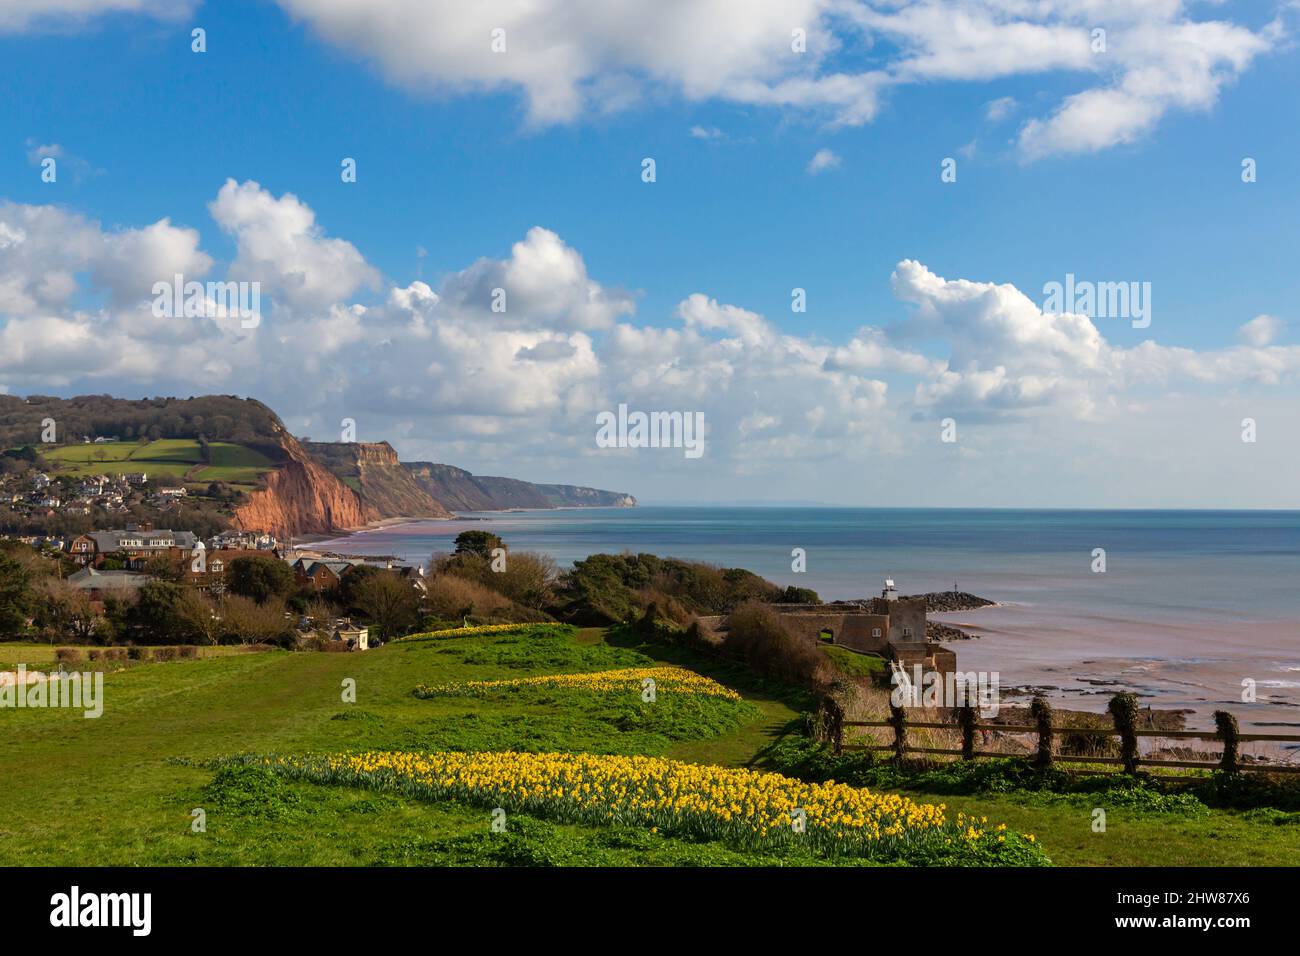 Sidmouth, Devon, UK. 4th Mar, 2022. UK Weather. sunshine and Daffodils in bloom next to the South West Coast Path at Sidmouth in Devon, creating a sea of yellow thanks to Keith Owen, a Canadian investment banker who lived in Sidmouth - when he died in 2007 he left his entire life savings, £2.3 million to the town's Sid Vale Association, with his dying wish for a million flowers to be planted. The hope is that Keith's legacy brings happiness to locals and visitors for generations to come. Credit: Carolyn Jenkins/Alamy Live News Stock Photo